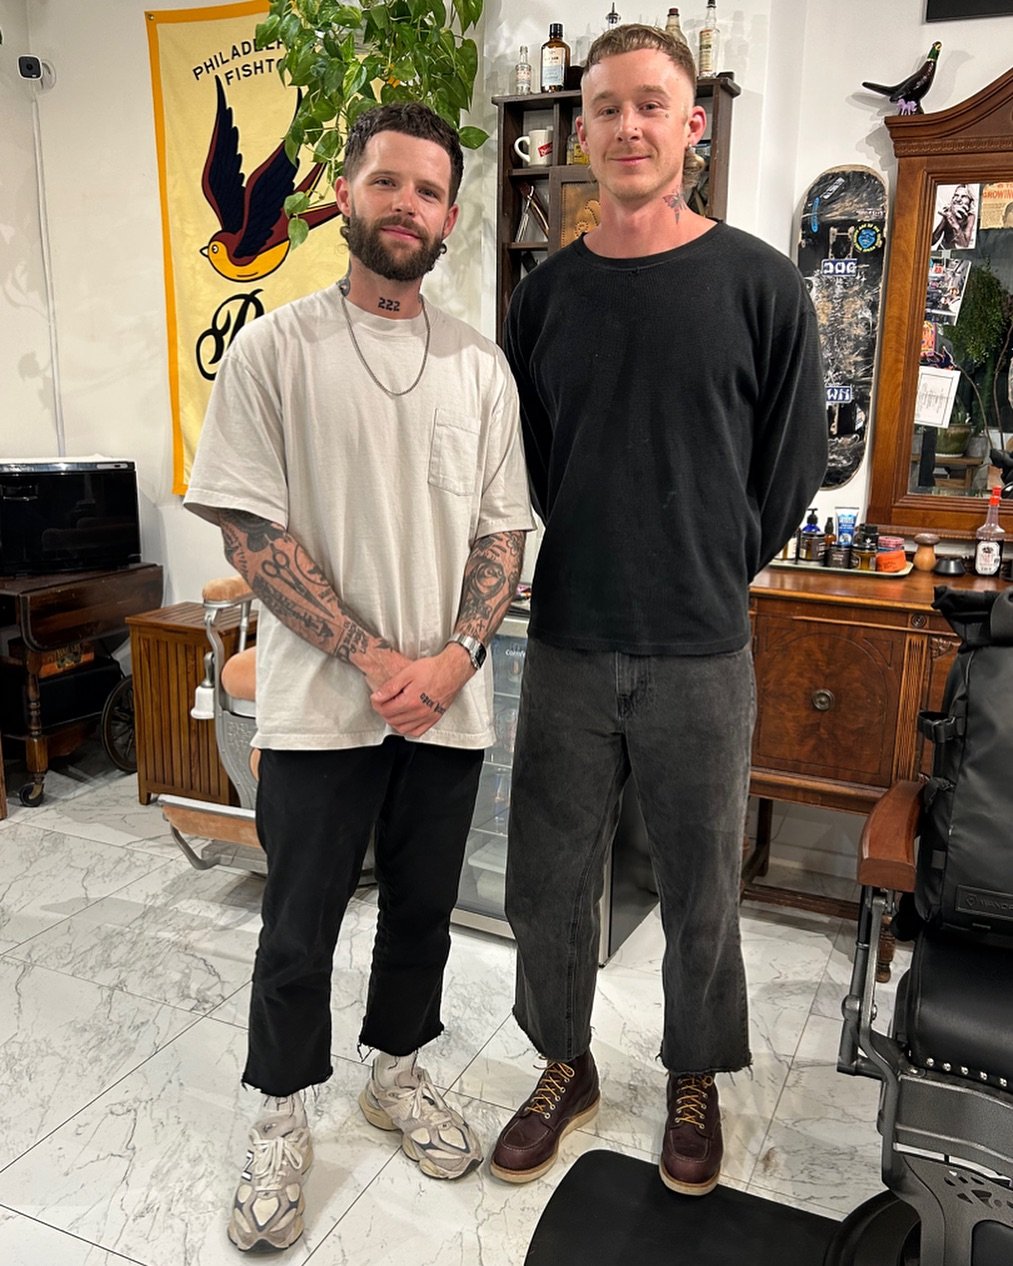 These 2 lovely humans made the vibe here so spectacular last night. @robertcwatkins of @themailroombarber gave @mitchellcuts_19 a siiick style while educating some of the best and hungry to learn barbers we have in Philly (and some from outside PA to